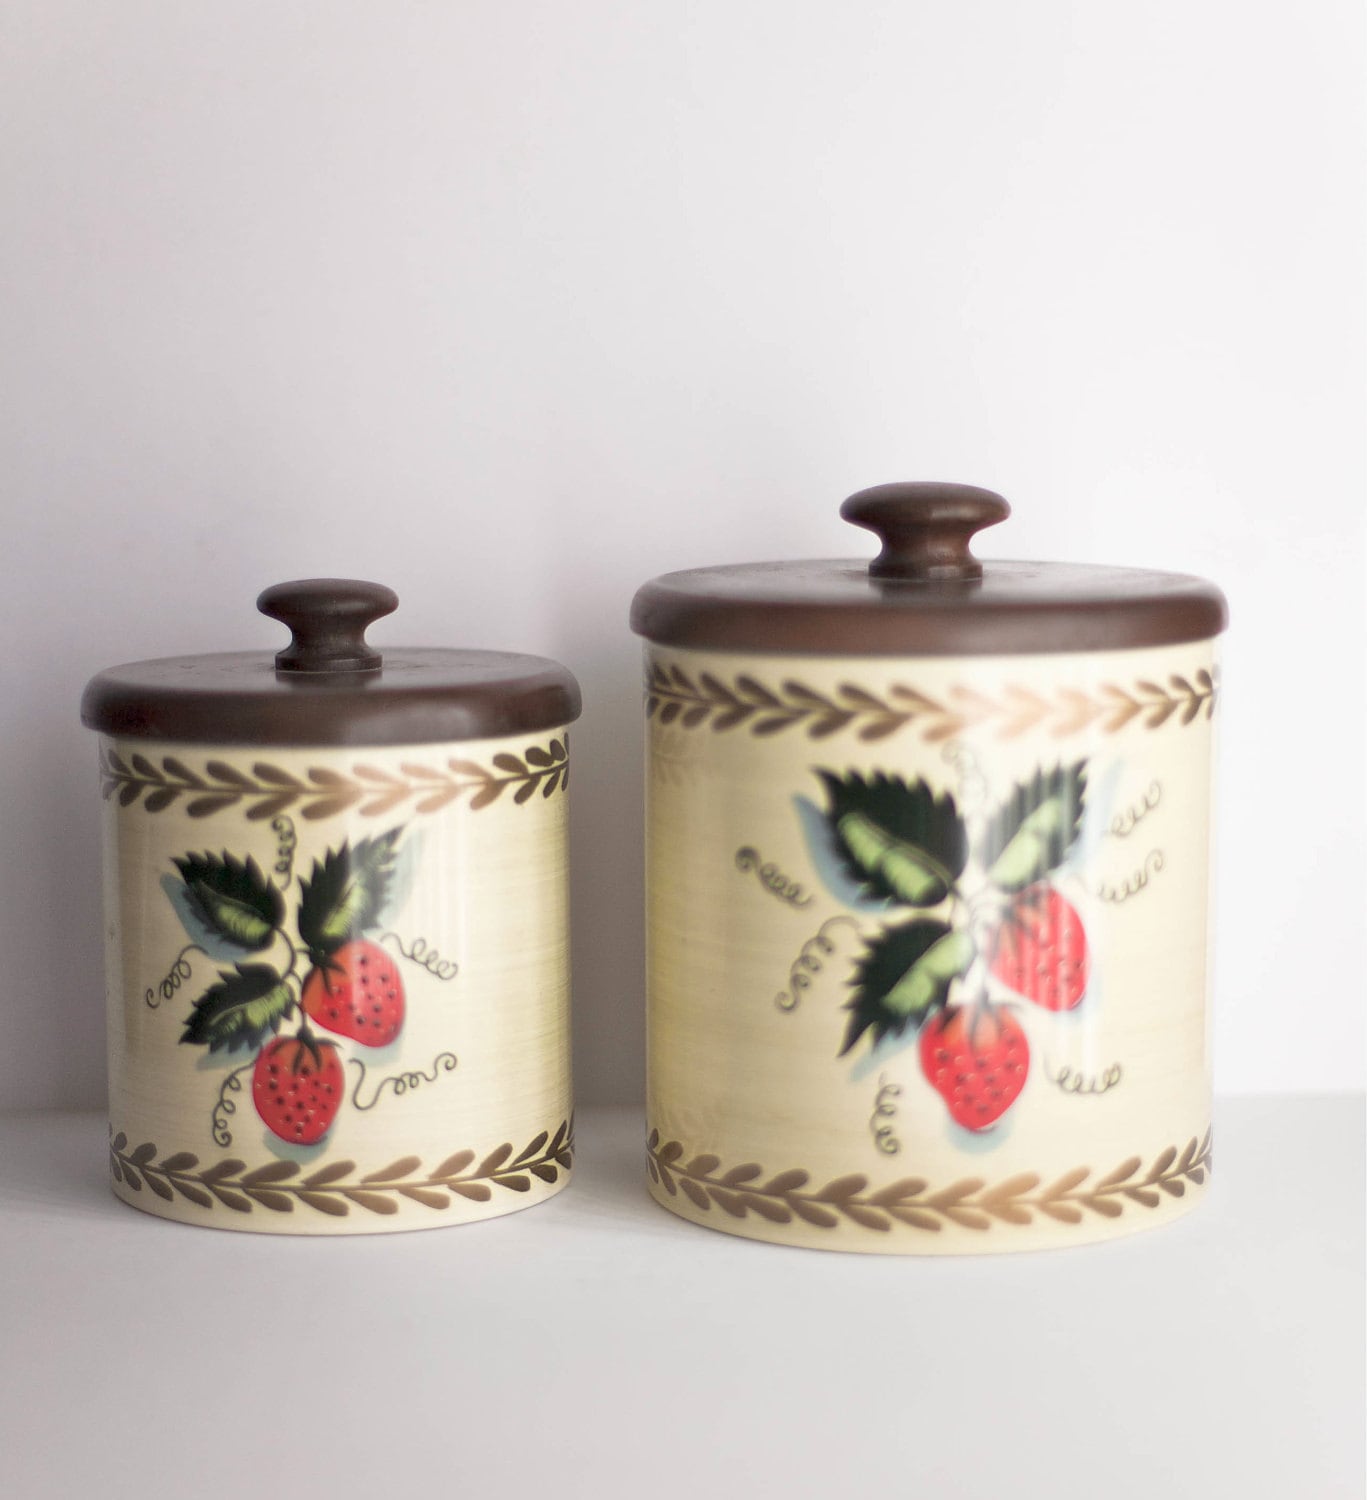 Vintage Kitchen Canisters Set Metal Ransburg Strawberry 1970s